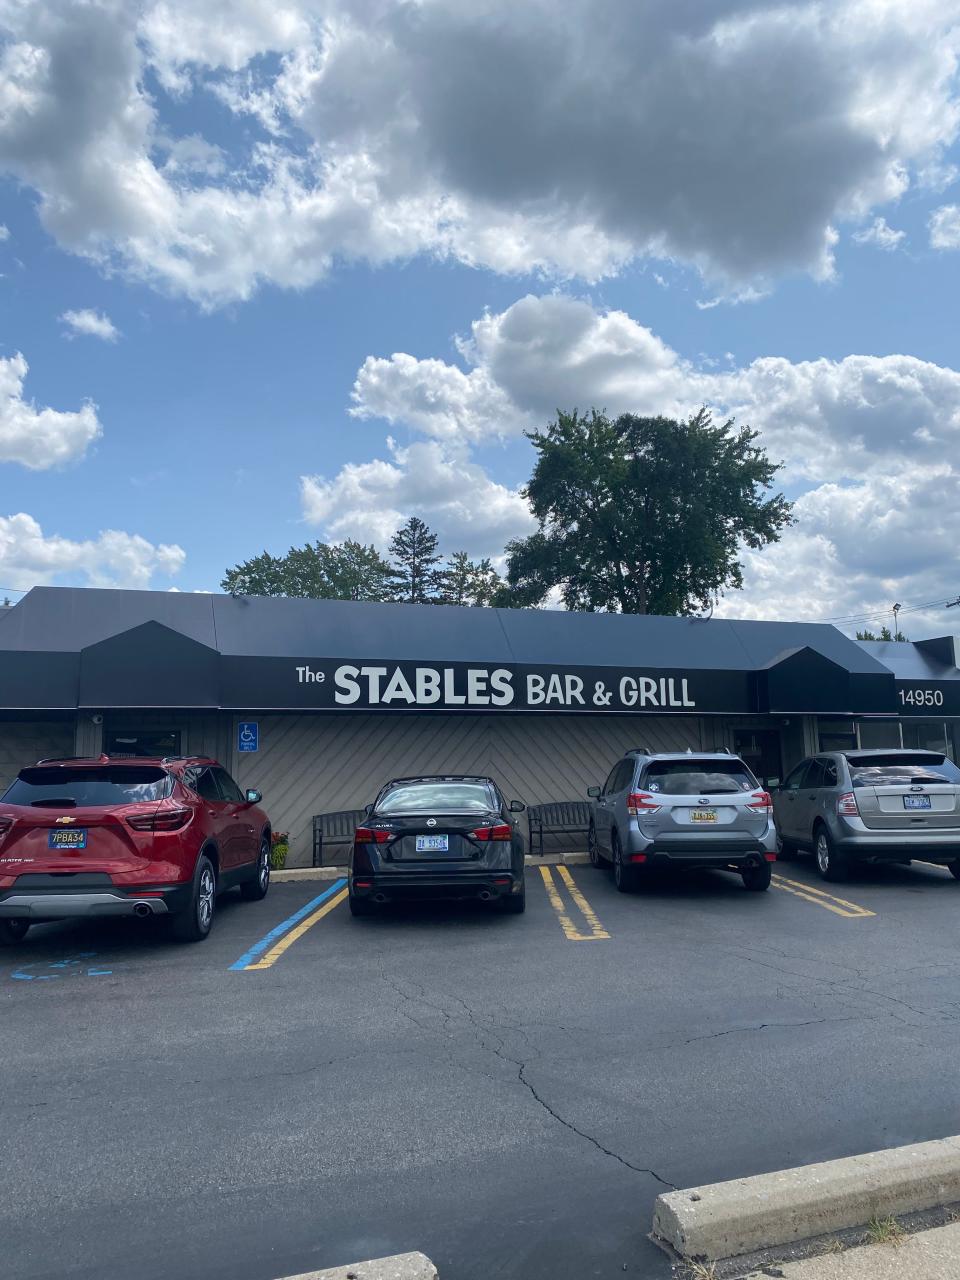 Stables Bar & Grill, located in Livonia